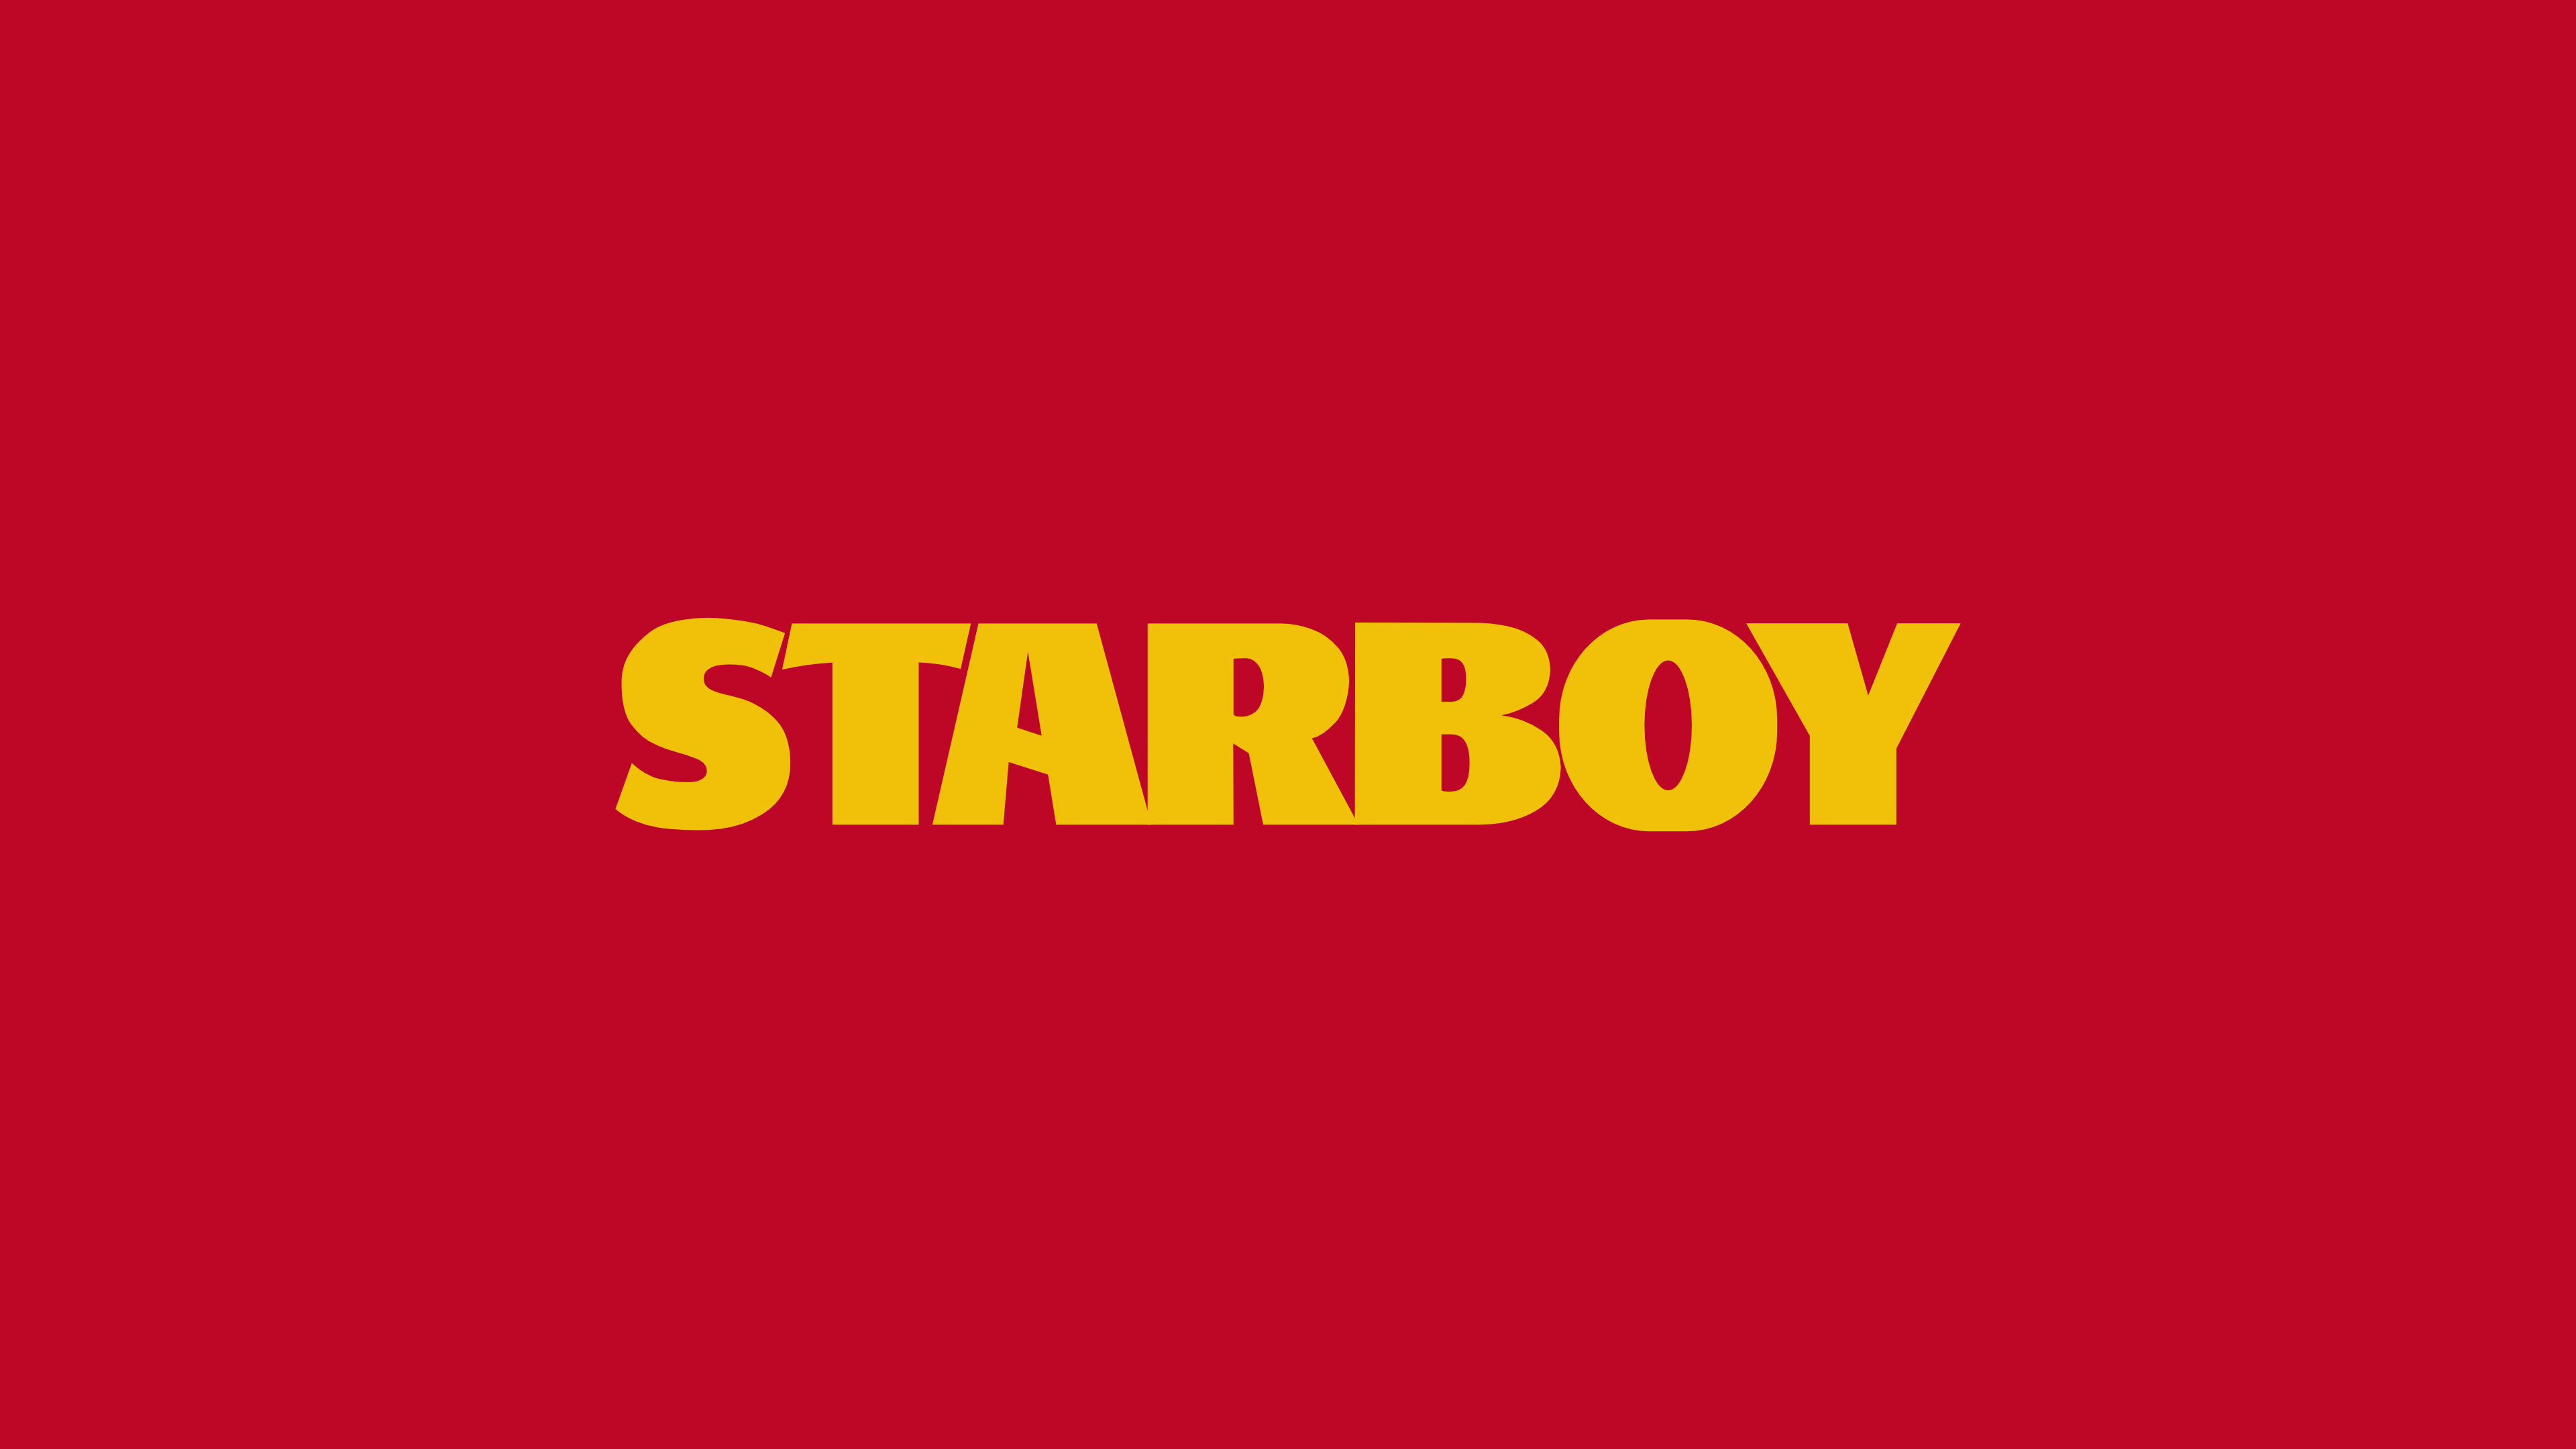 Star boy the weekend. Starboy обложка. The Weeknd. Starboy. Starboy обои. Старбой the weekend.